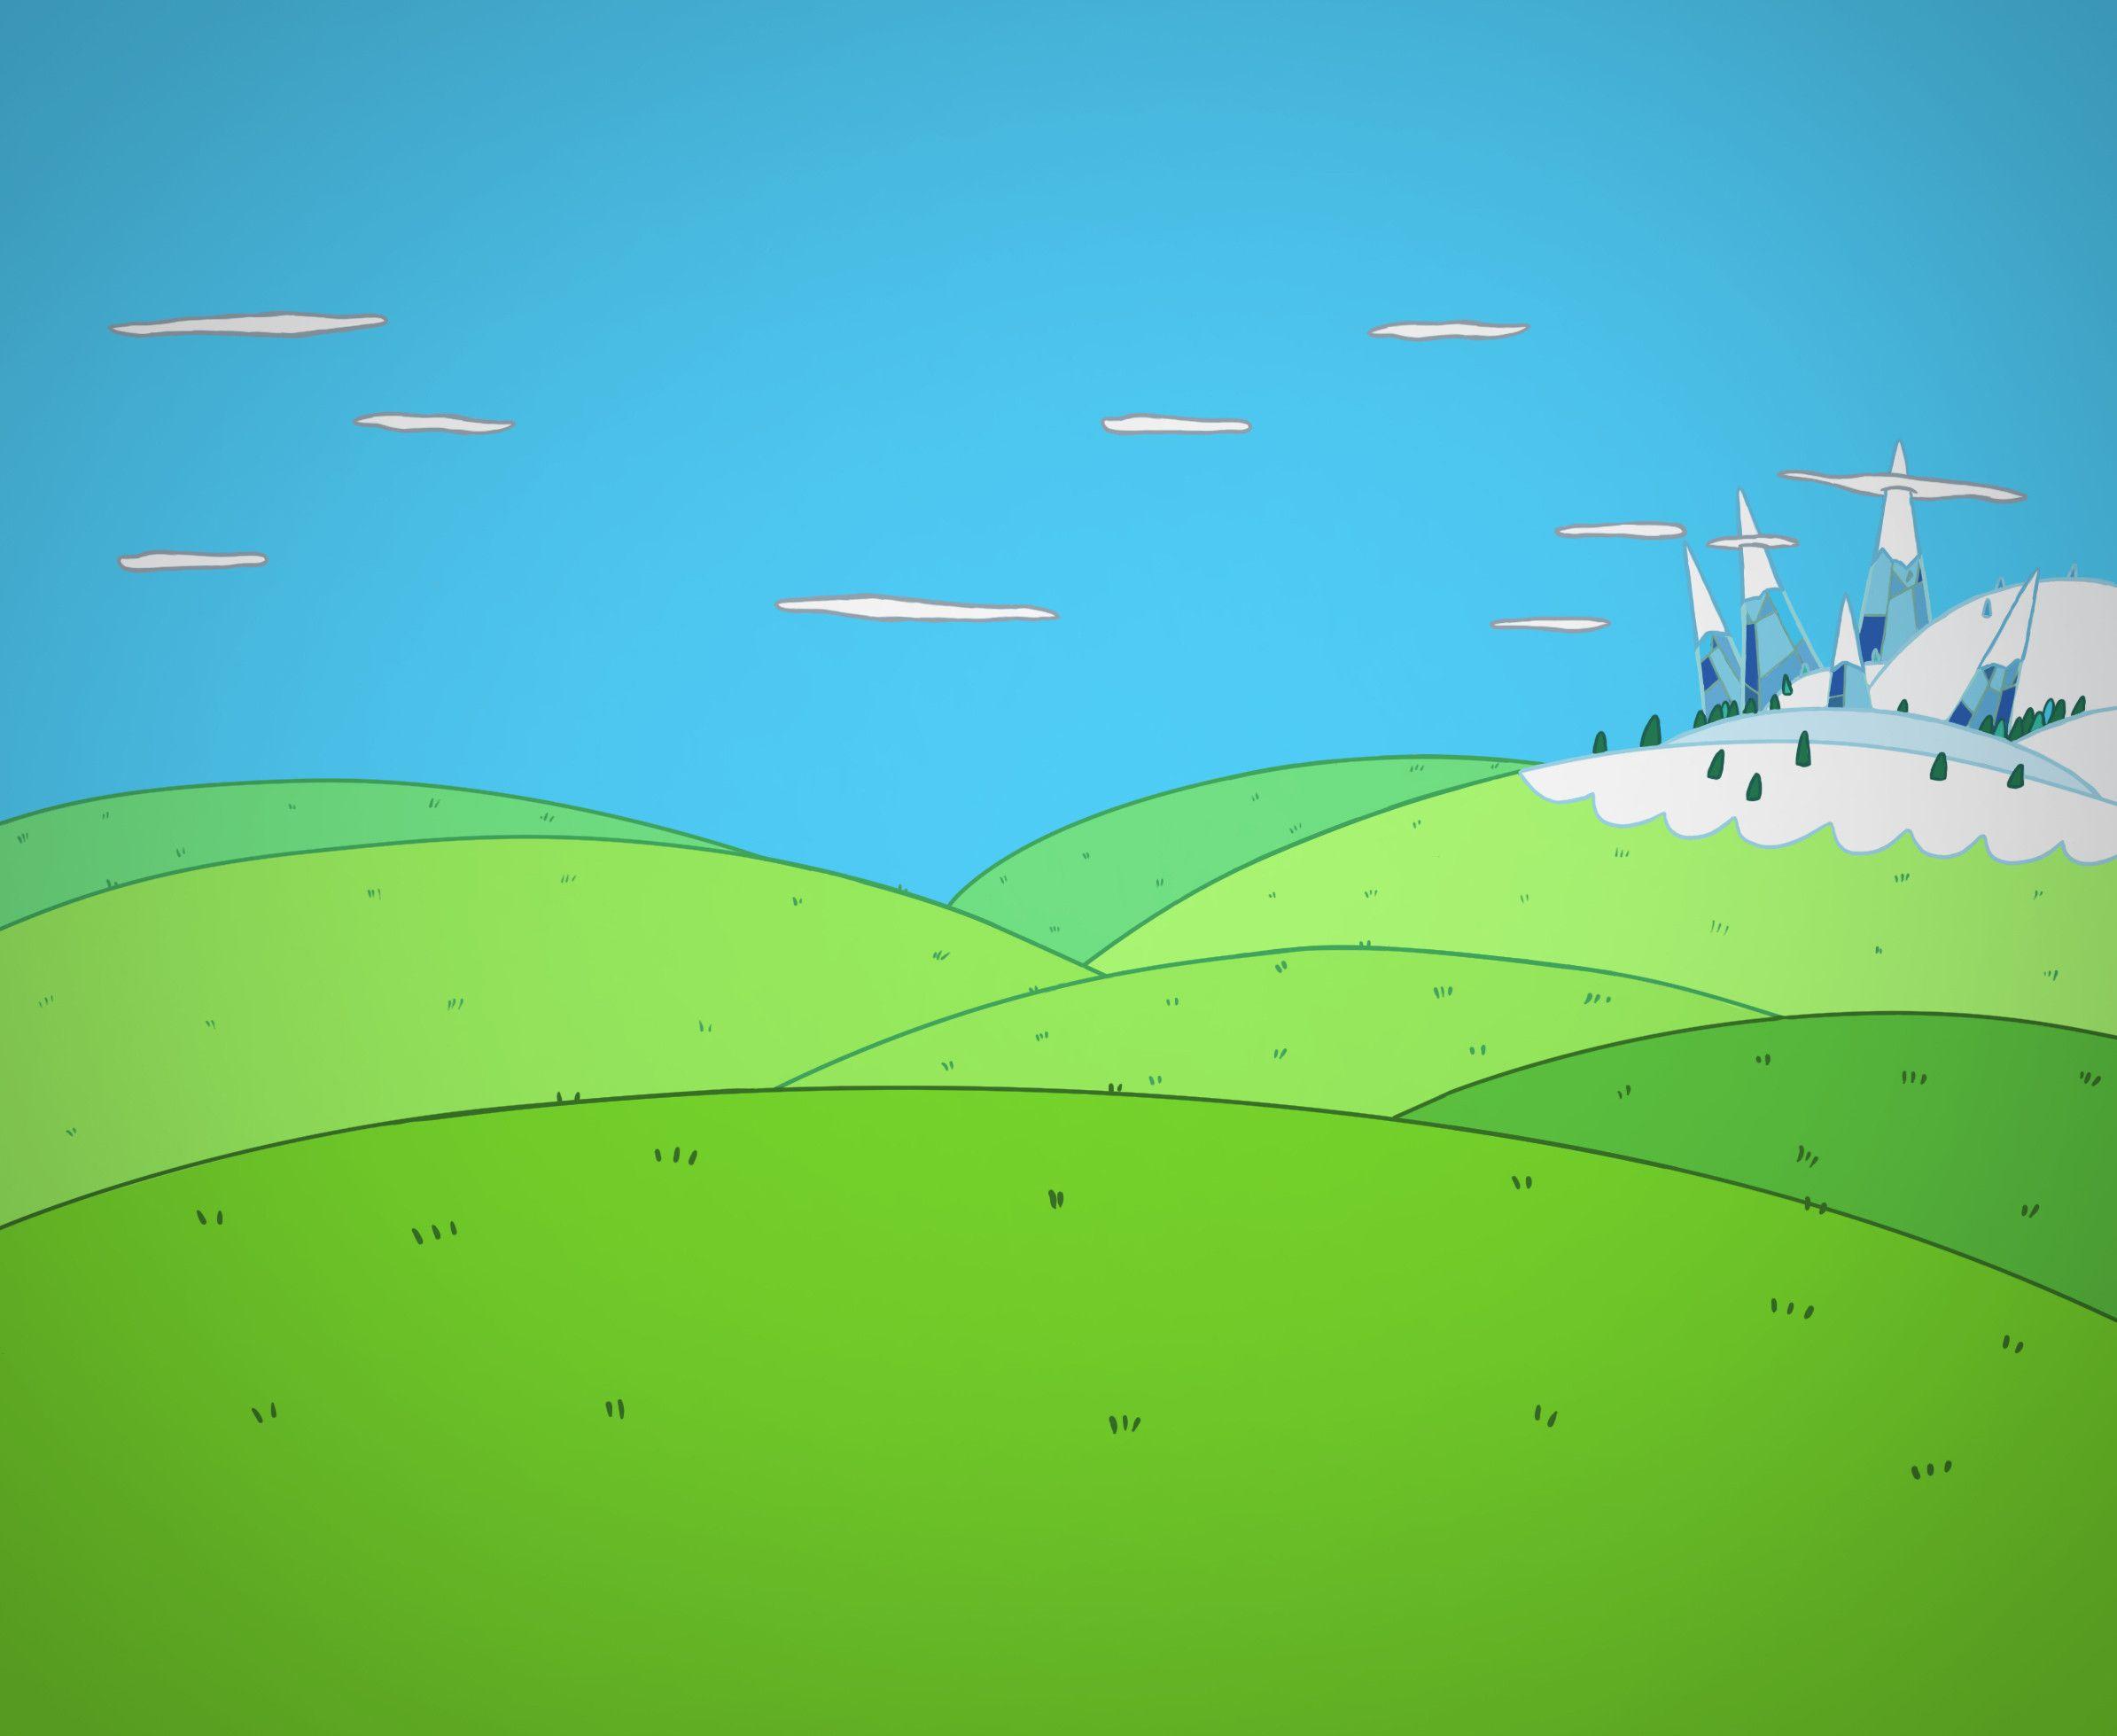 Adventure Time Backgrounds